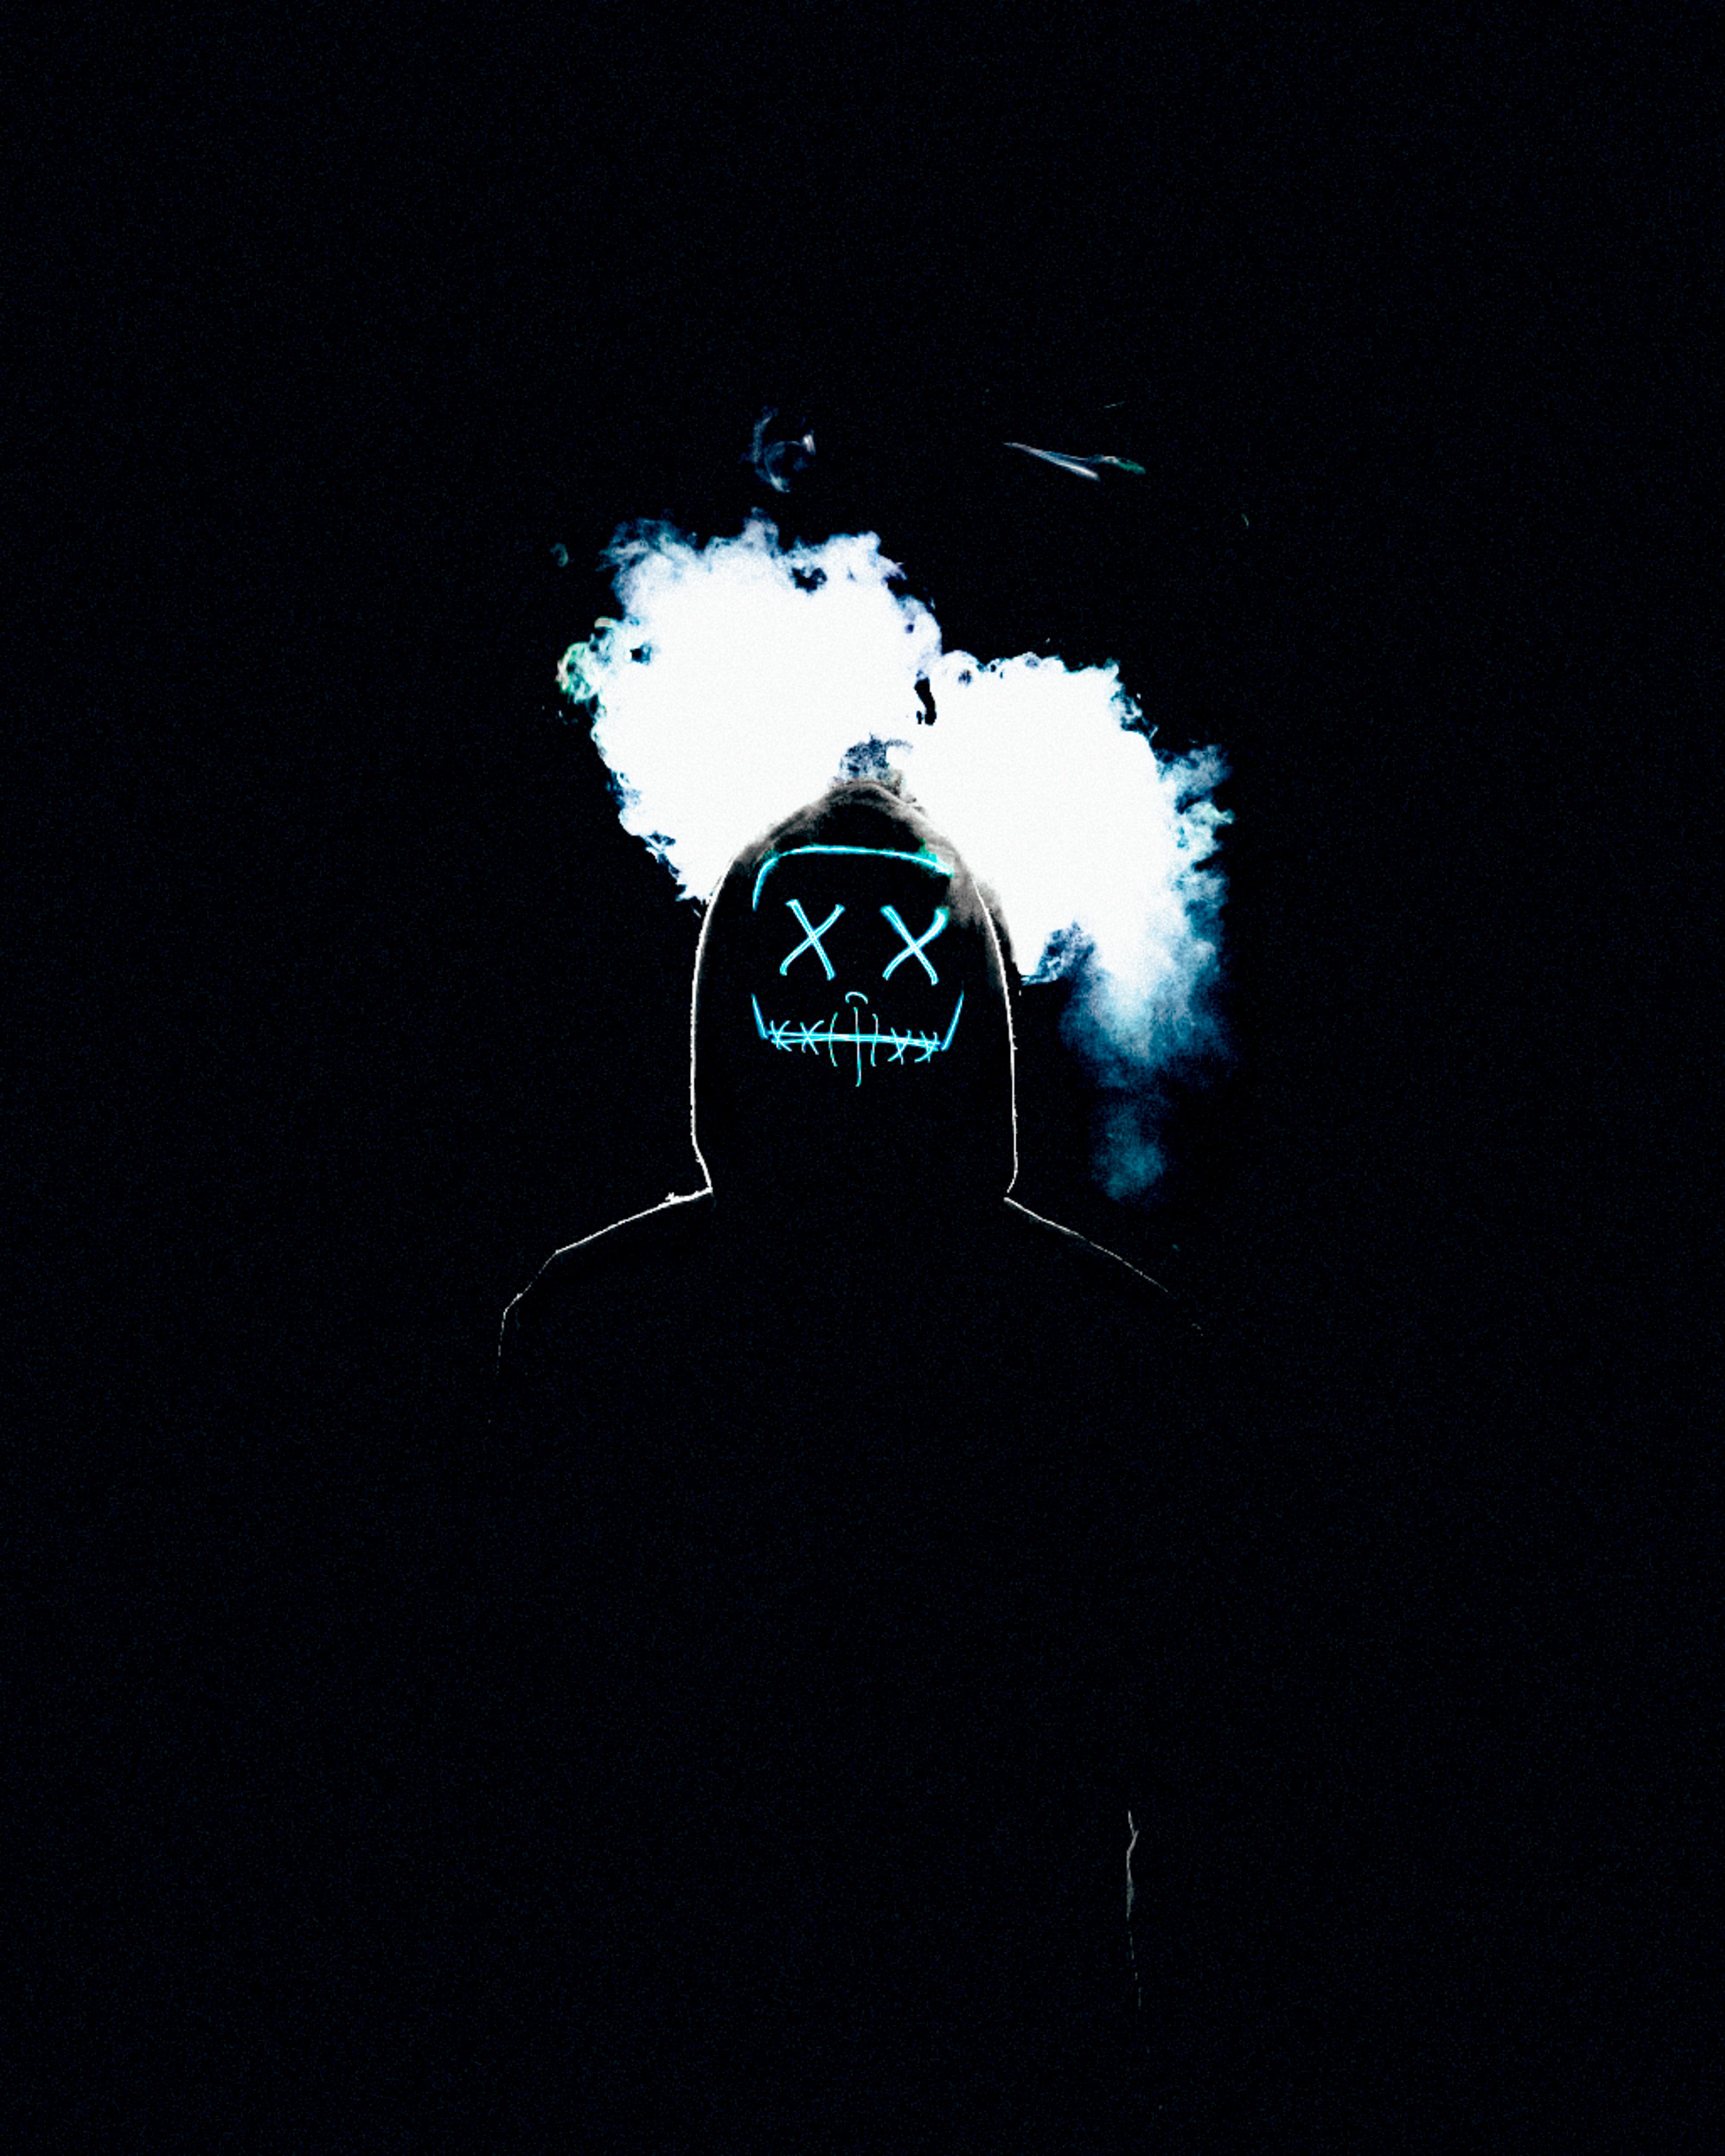 A hooded figure with a scary face on a black background with smoke - Smoke